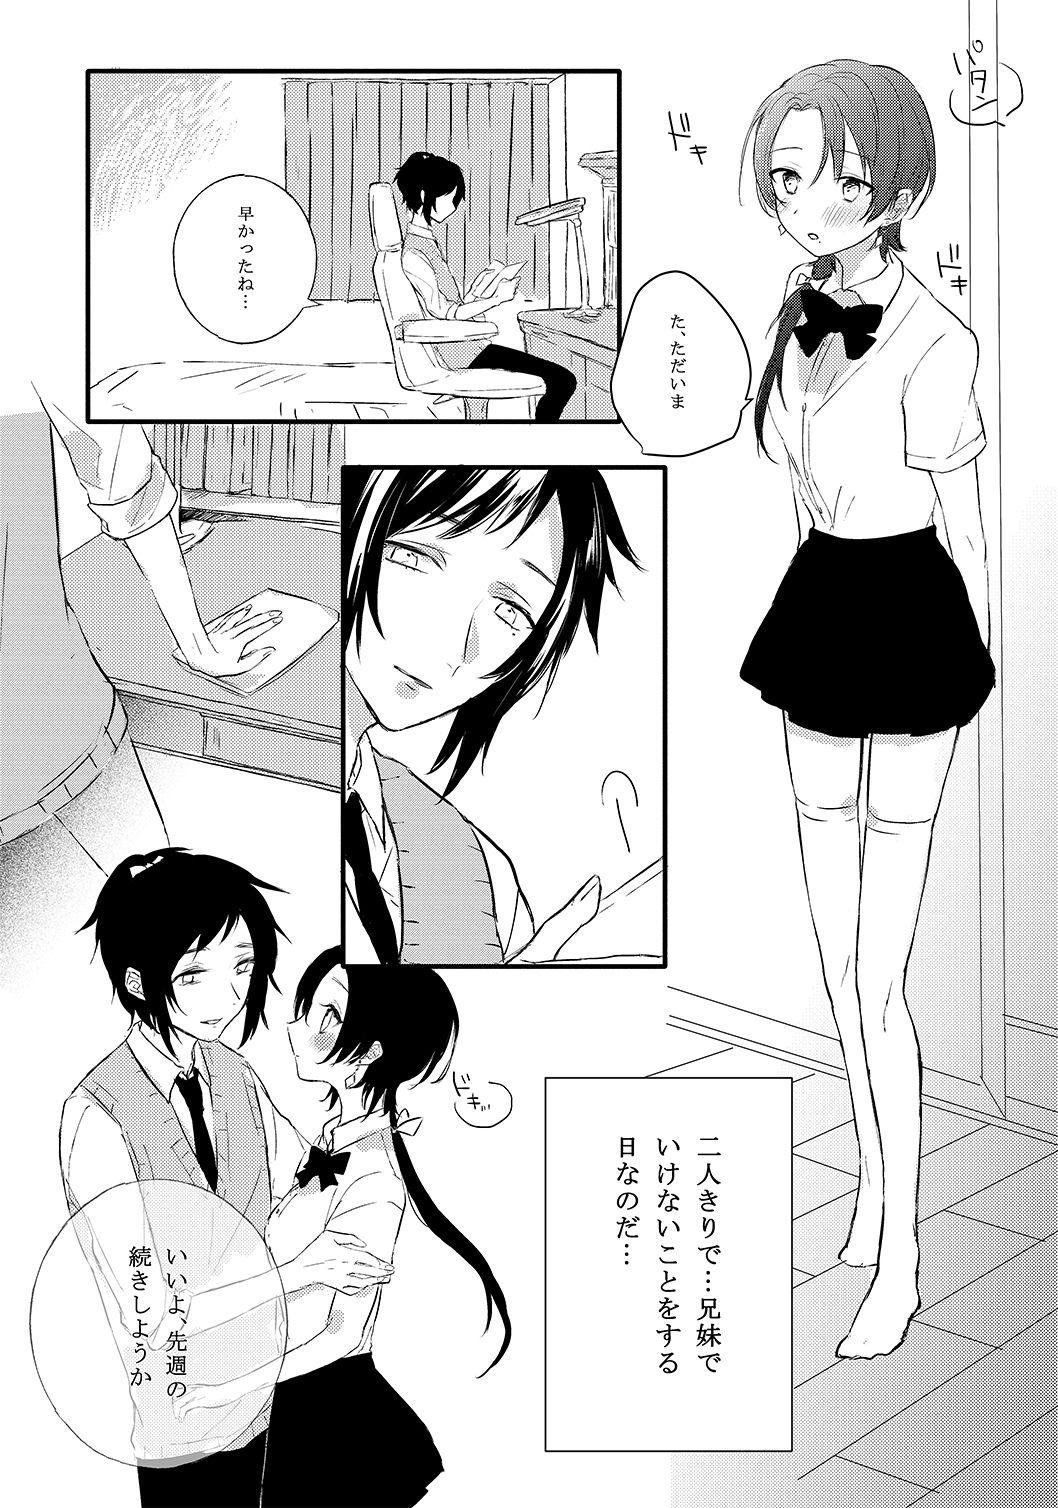 Fucking Pussy BROTHER COMPLEX + SISTER COMPLEX - Touken ranbu Deutsche - Page 4